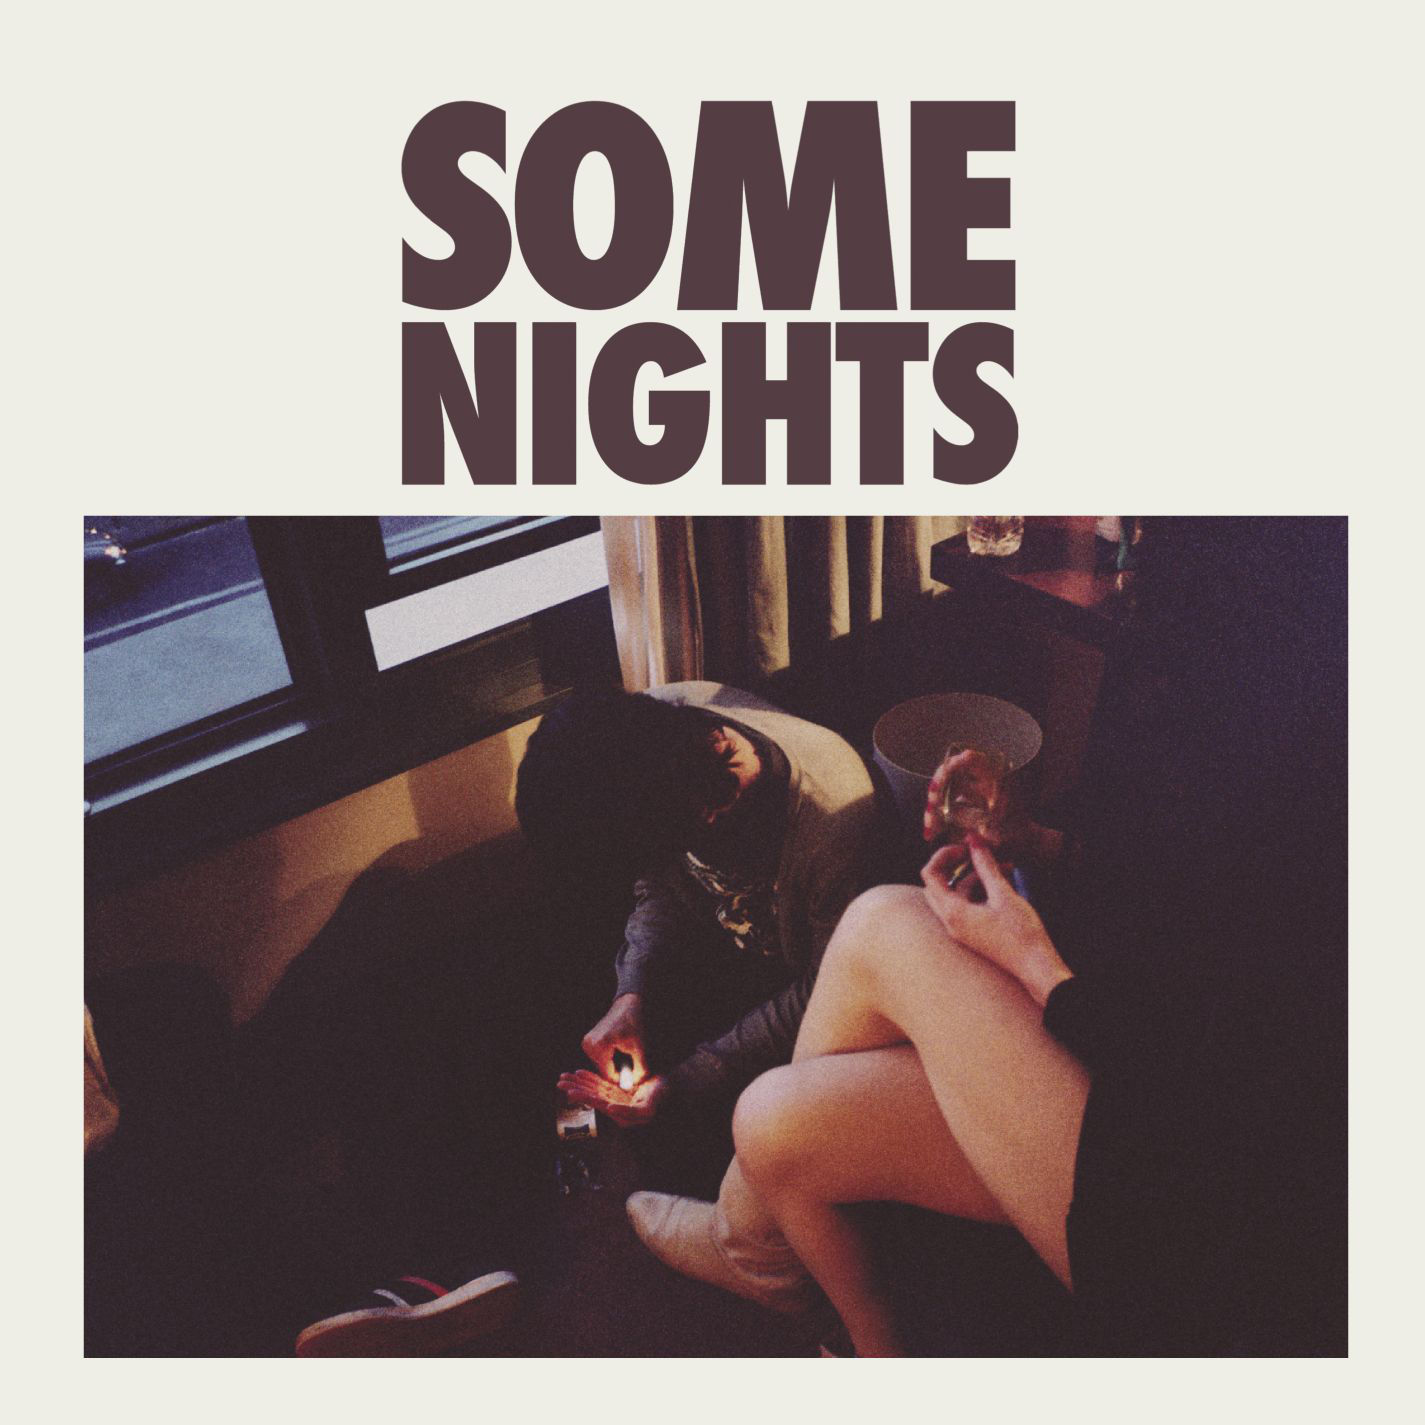 Art for Some Nights by Fun.